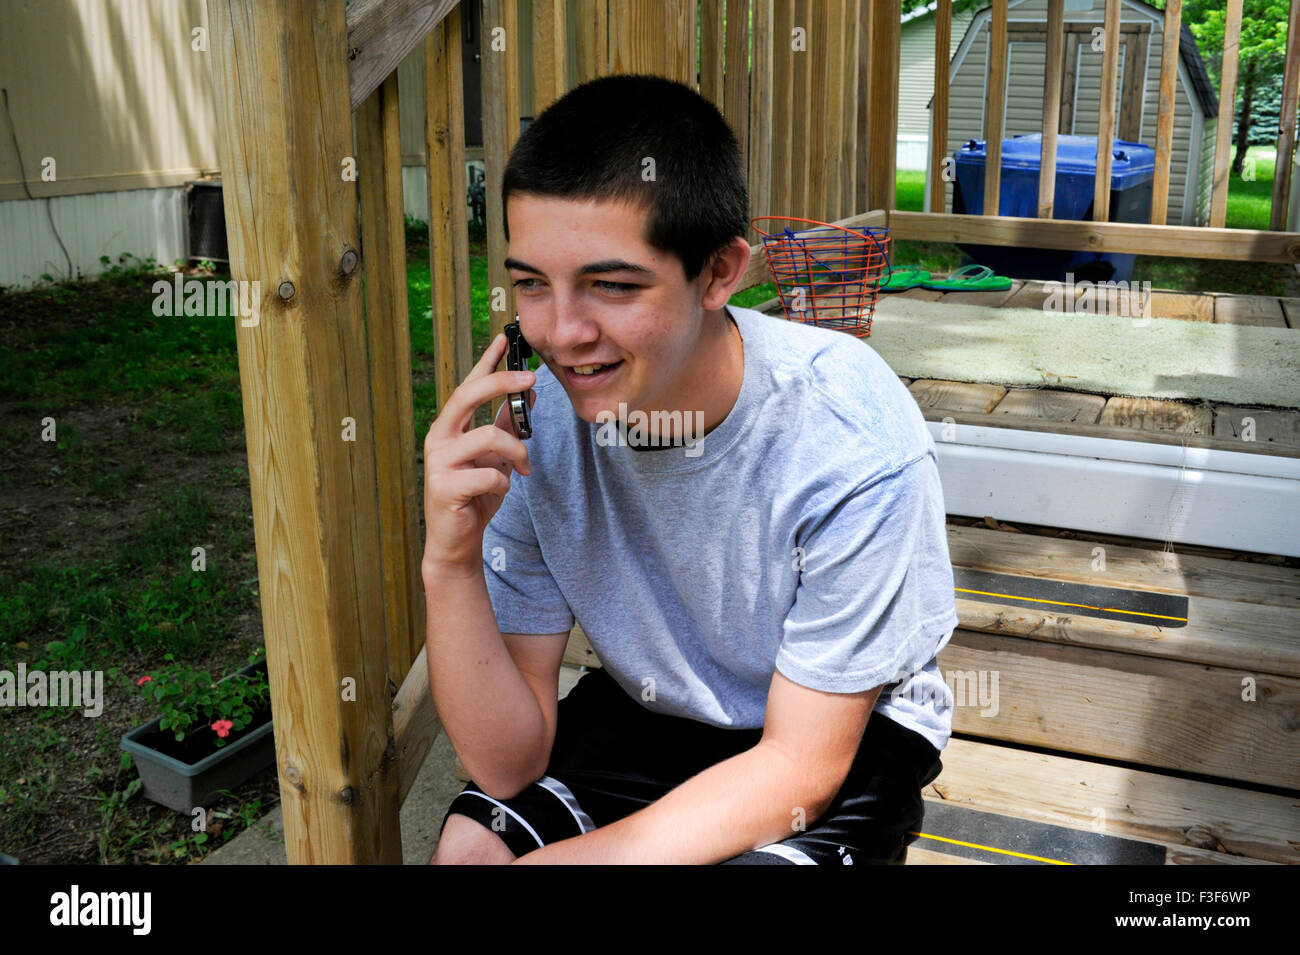 12-13 year old boy on cell phone. Stock Photo